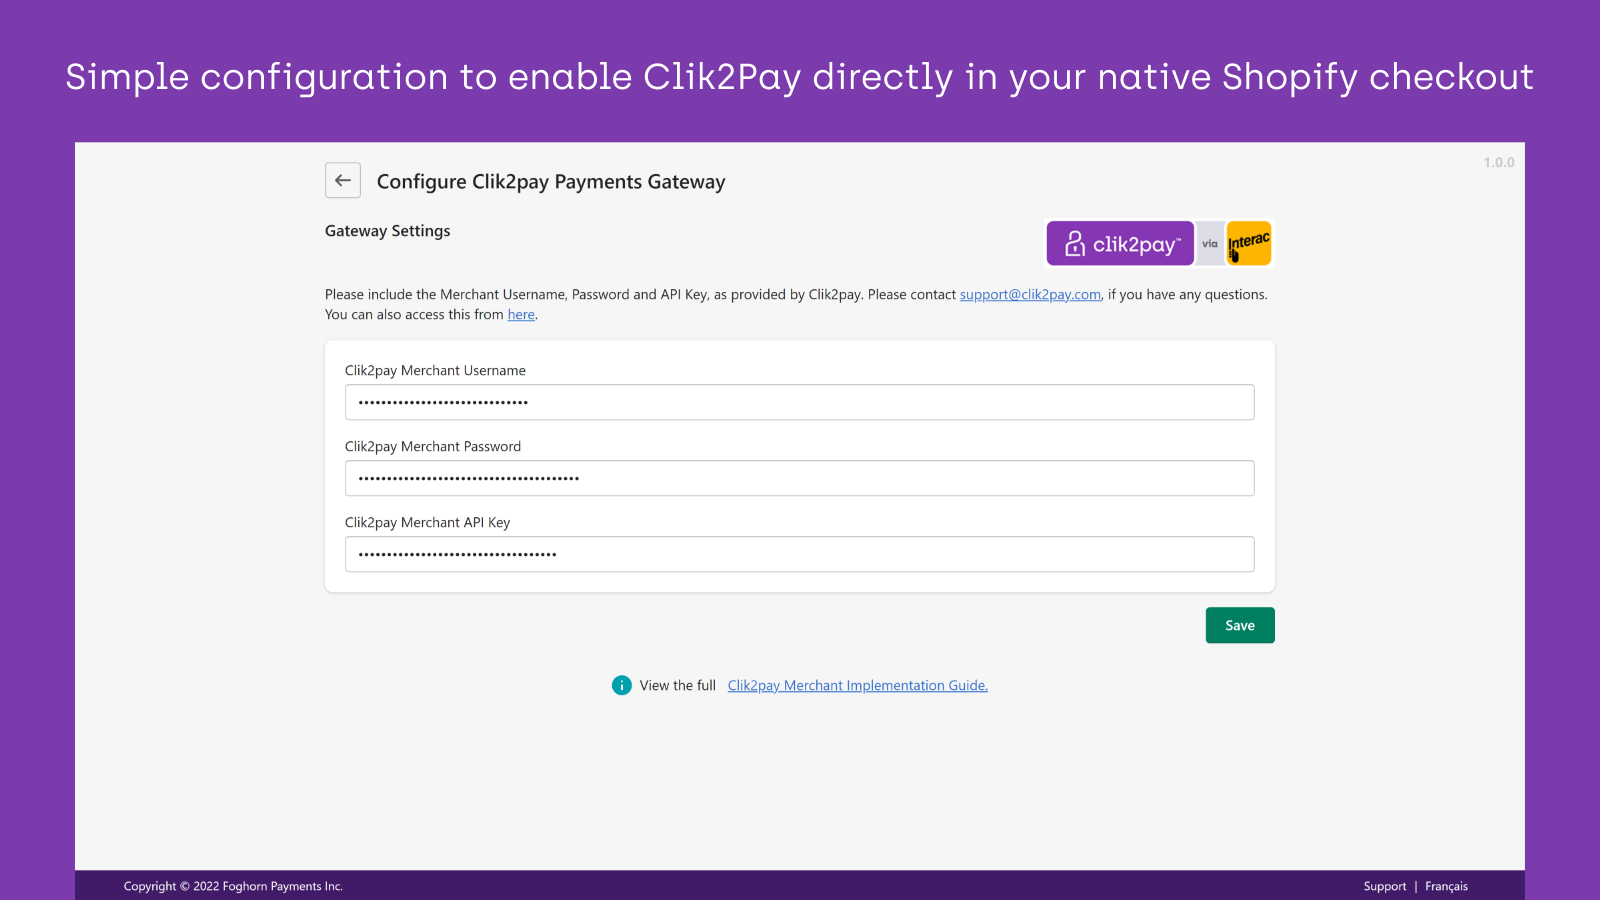 Simple configuration to enable Clik2Pay directly in Shopify